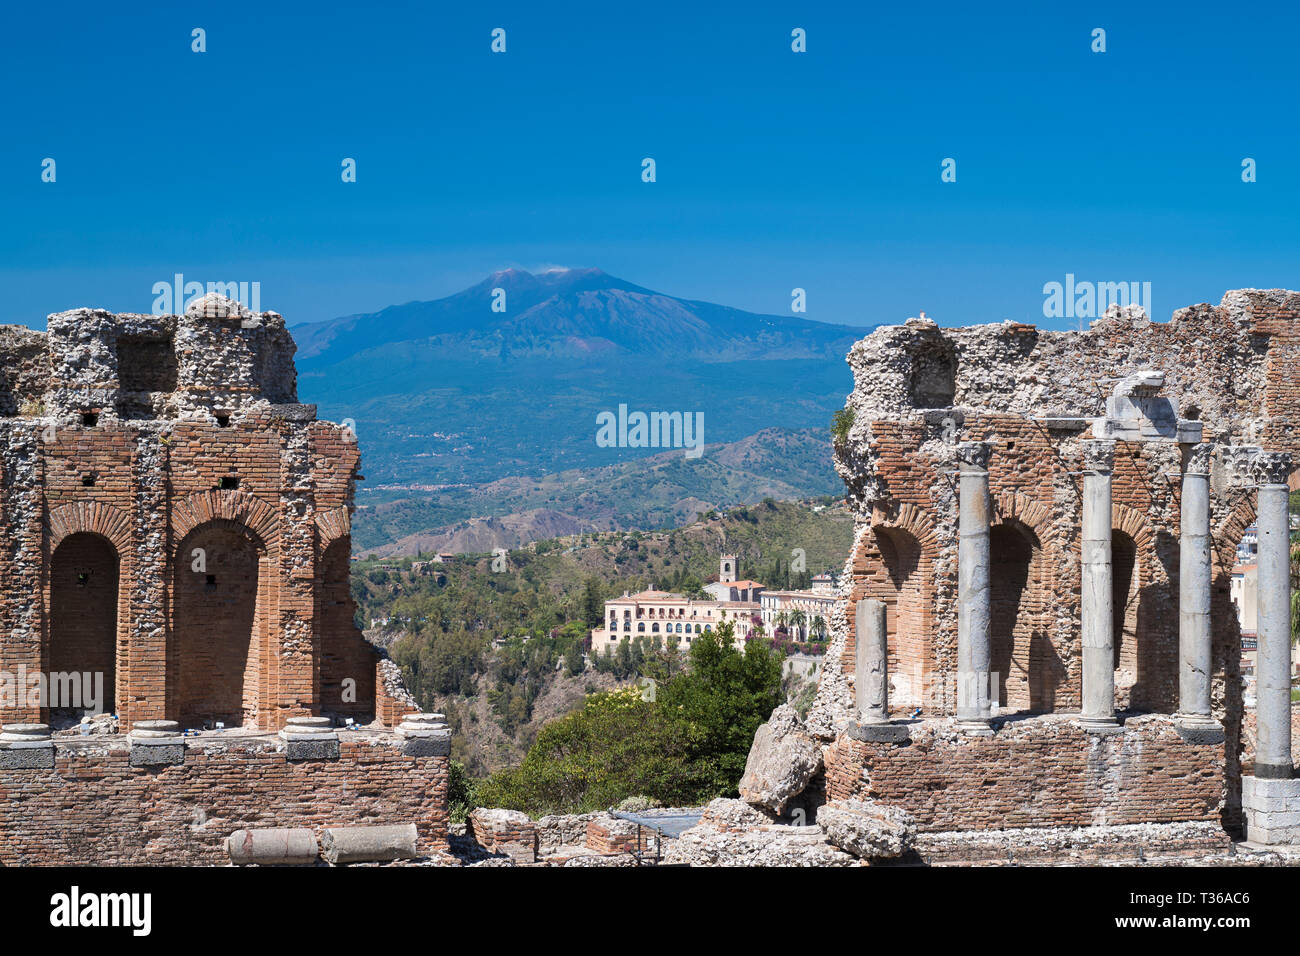 View of Mount Etna volcano from ruins of the ancient Greek Theatre amphitheatre - Teatro Greco - of Taormina, East Sicily, Italy Stock Photo